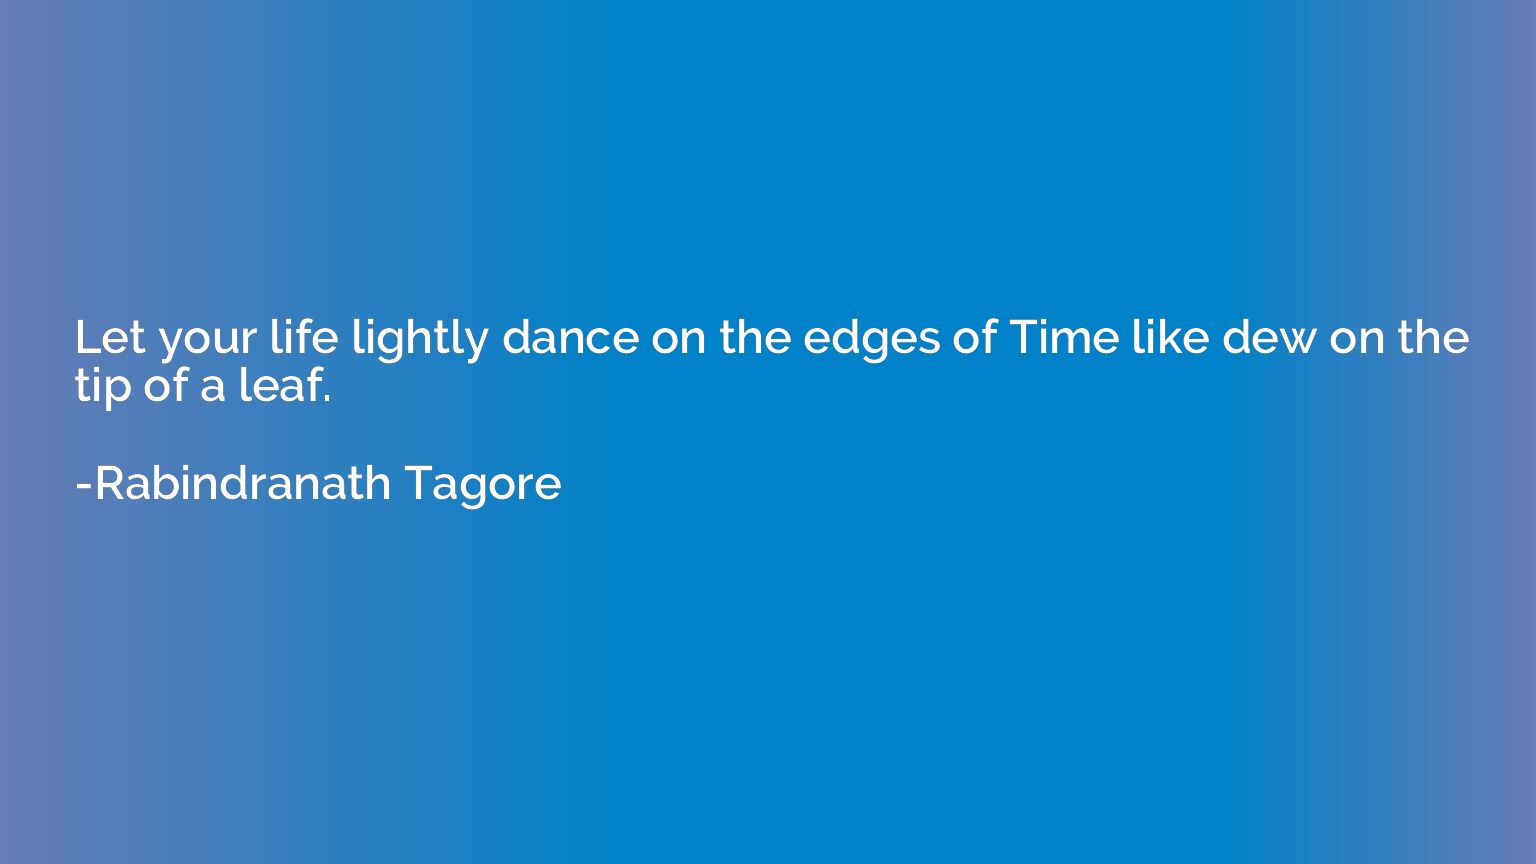 Let your life lightly dance on the edges of Time like dew on